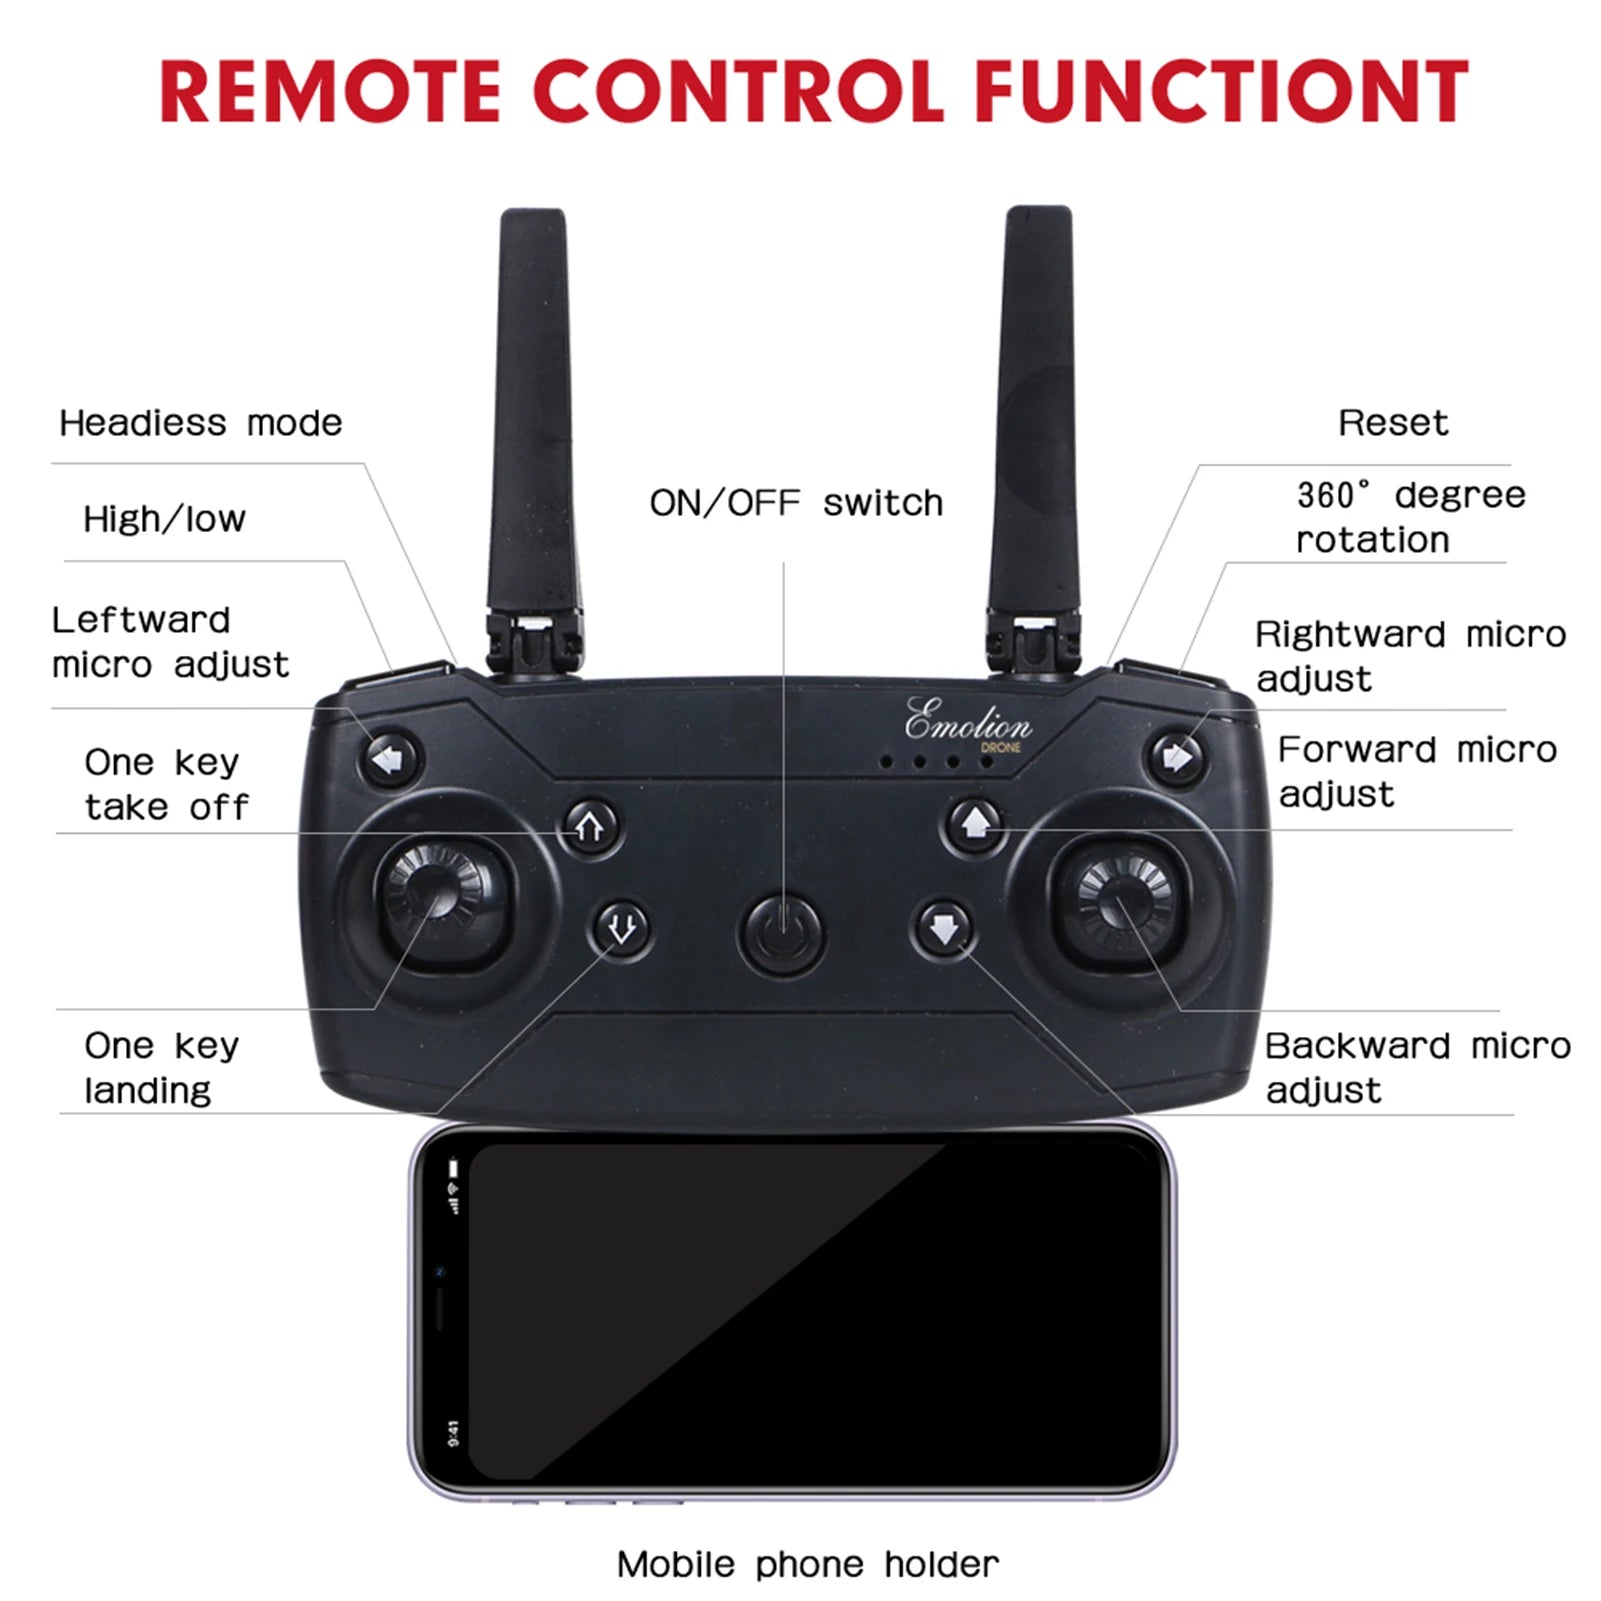 HJ95 Drone, remote control functiont headiess mode reset on/off switch 360